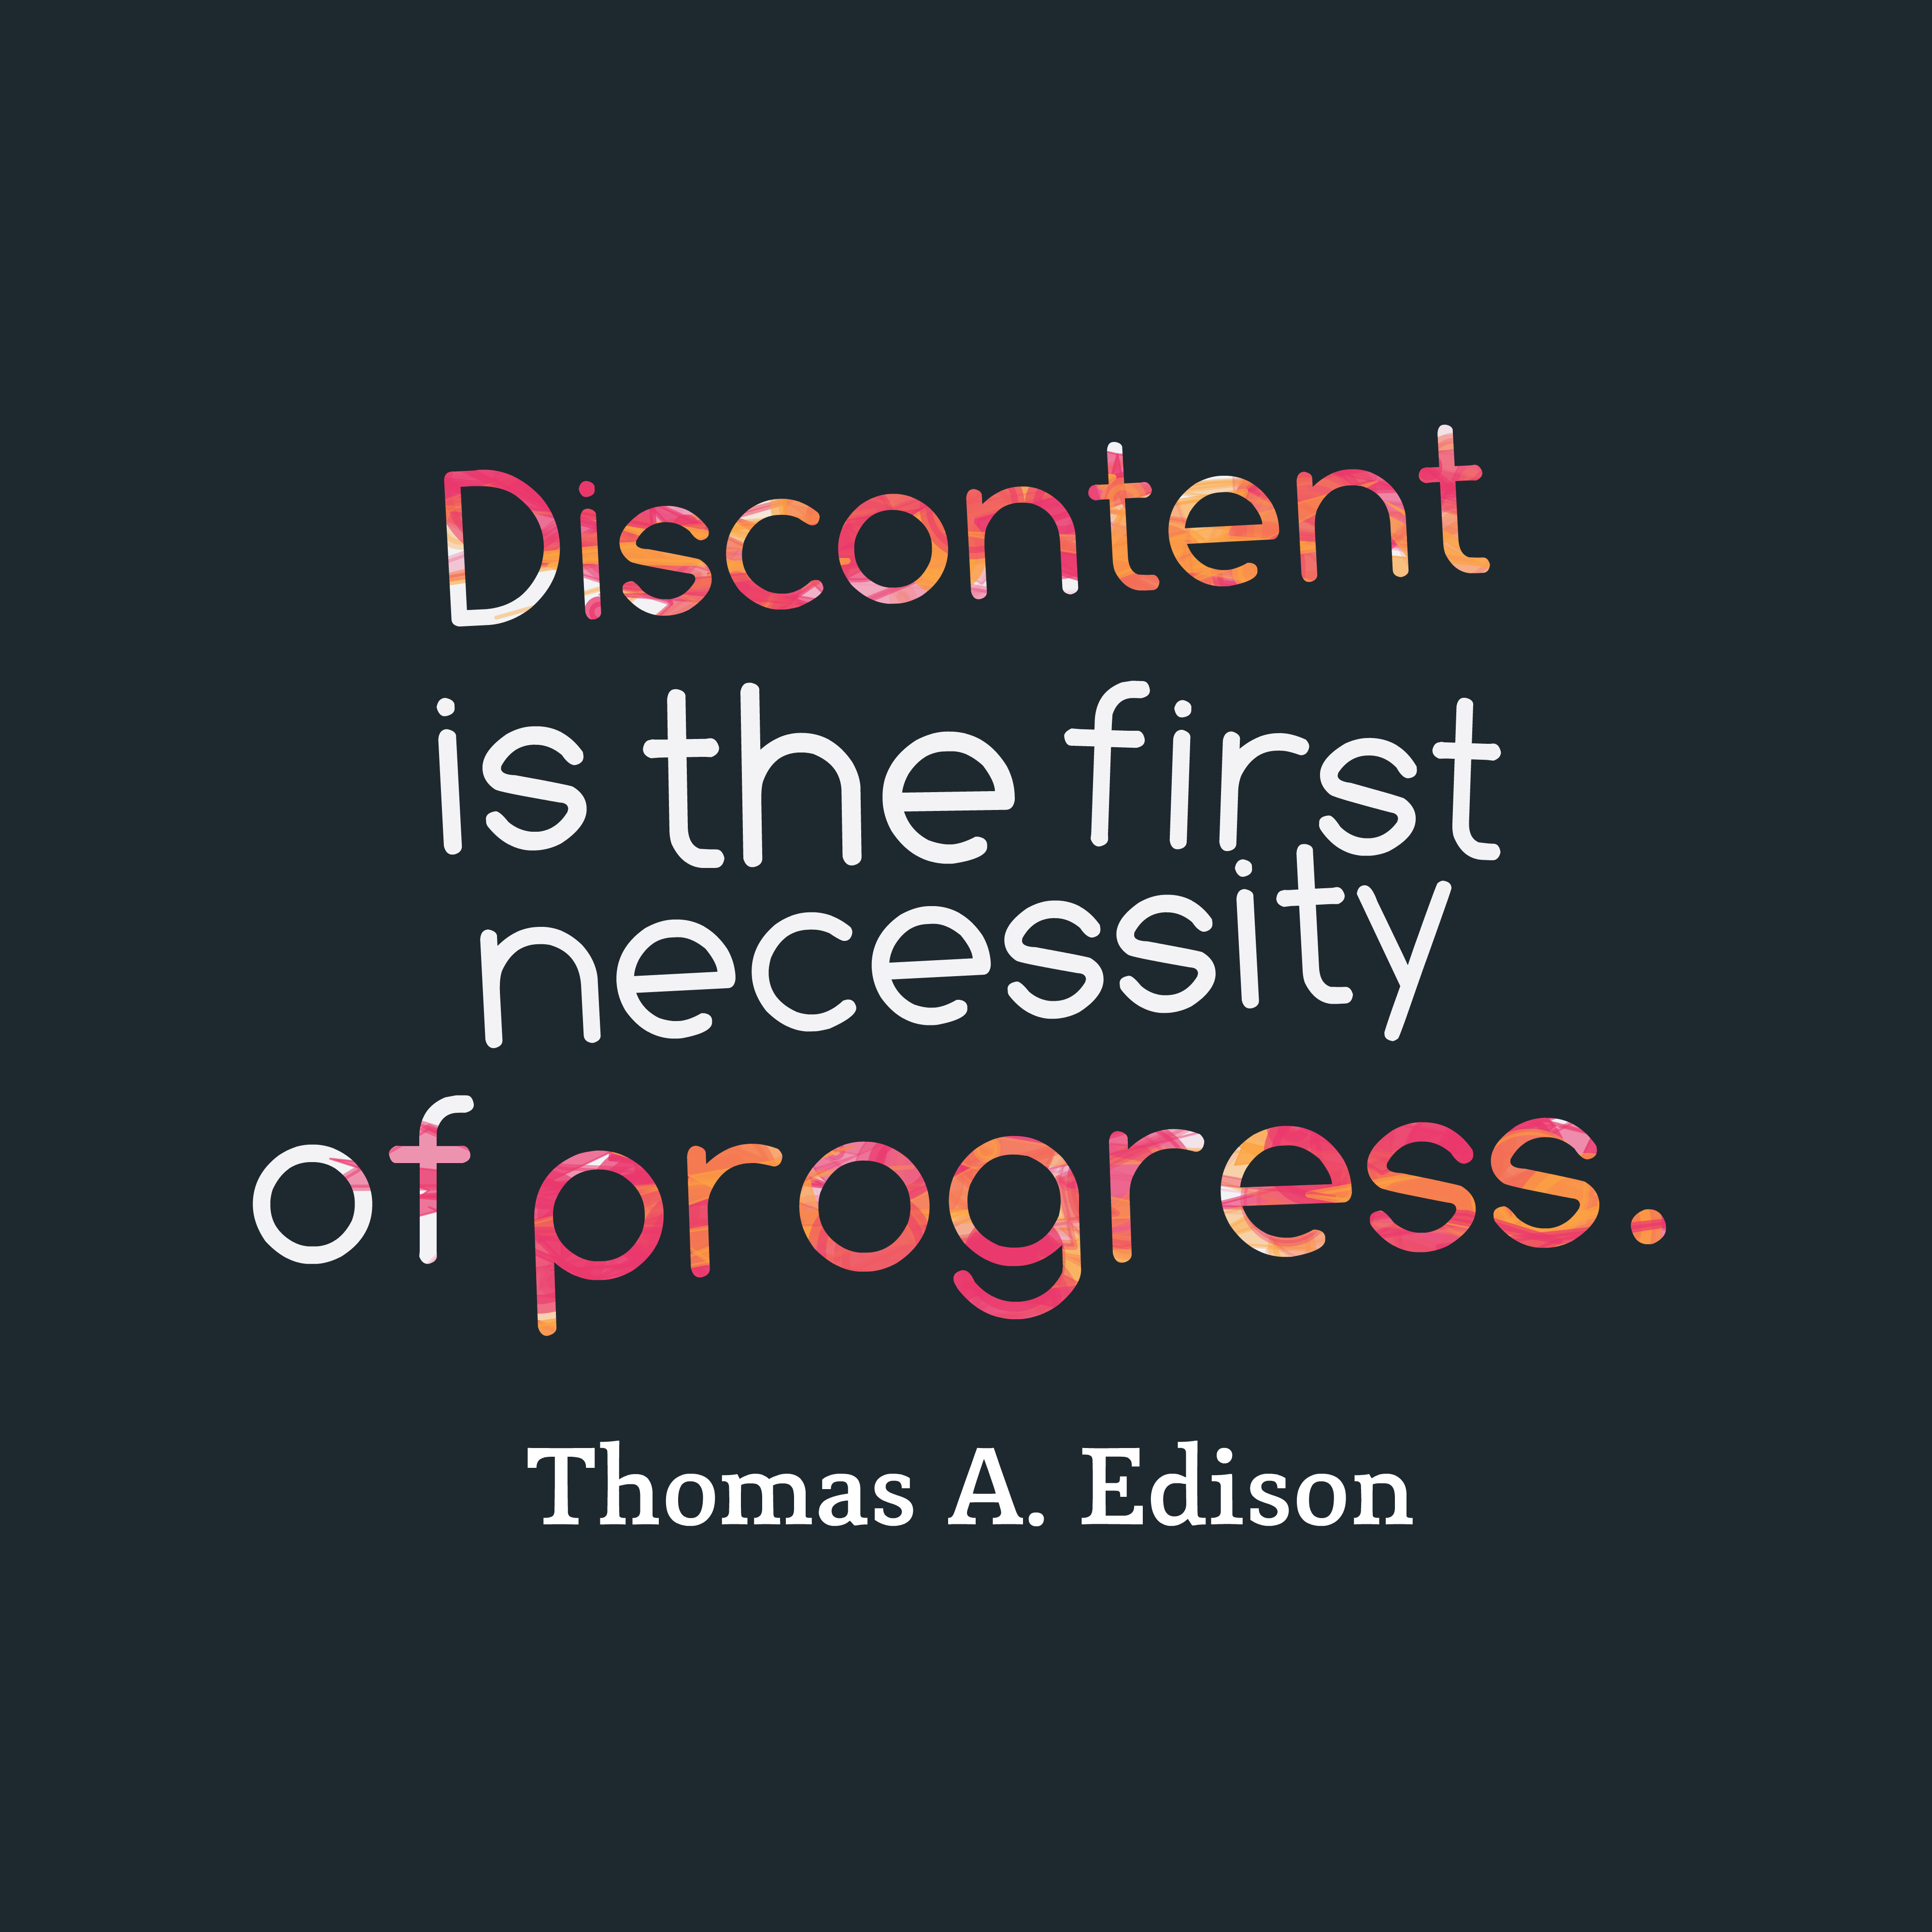 Discontent is the first necessity of progress. Thomas A. Edison